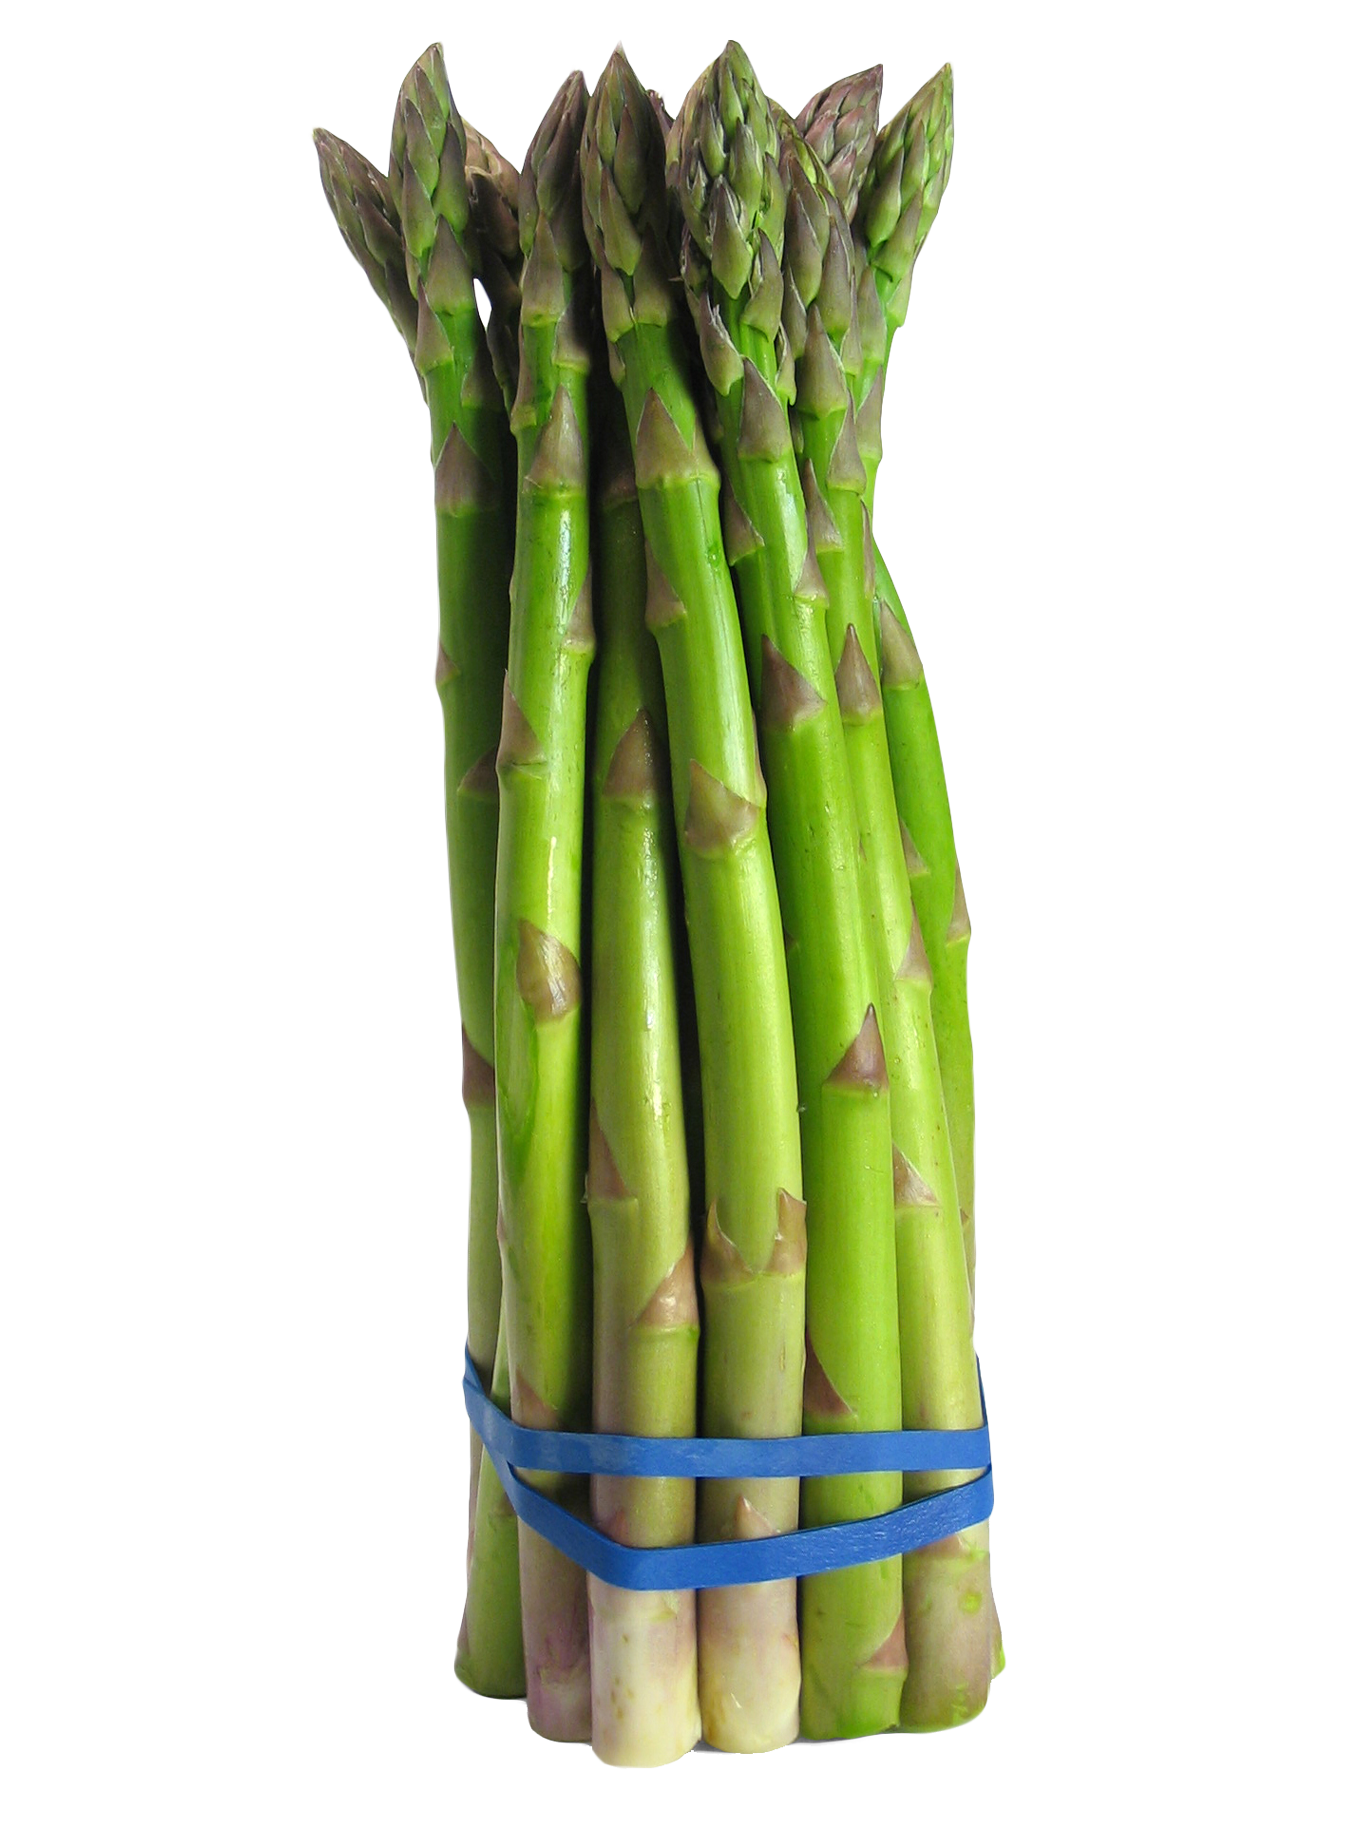 A Bunch Of Asparagus Tied With Rubber Bands